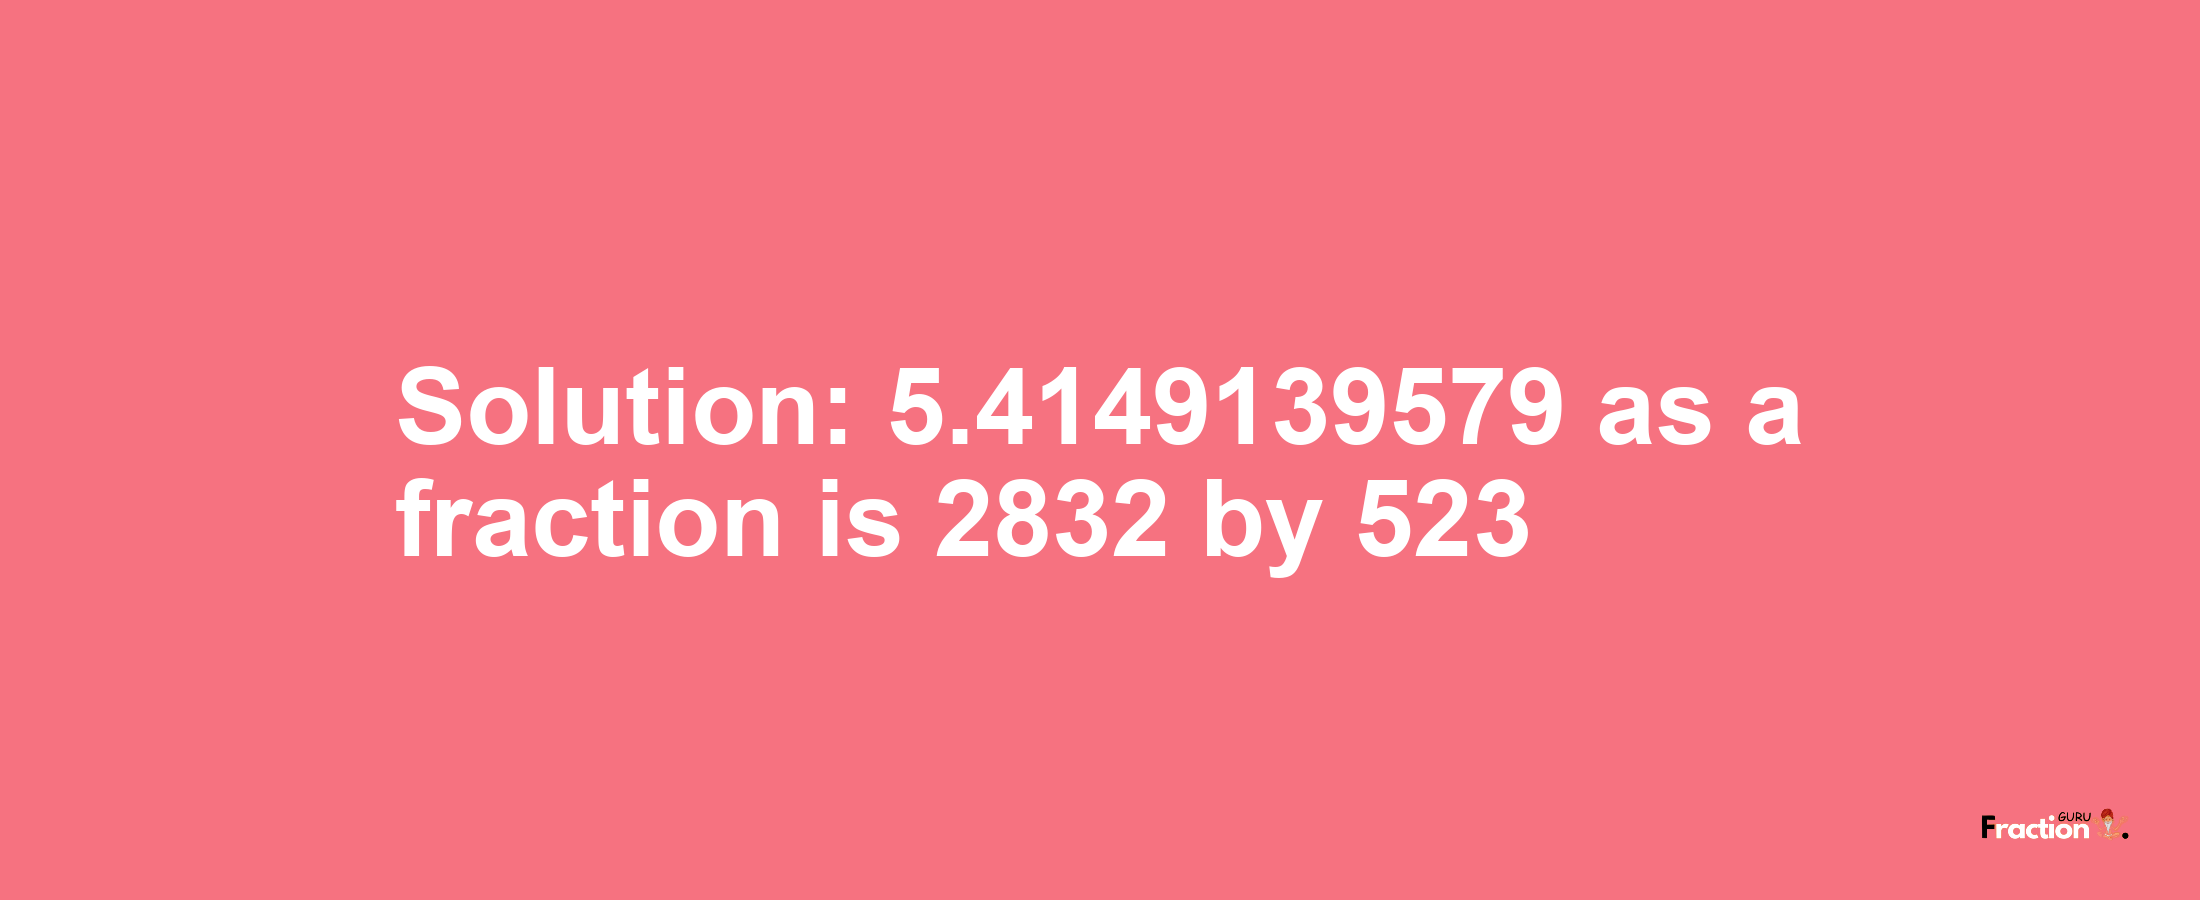 Solution:5.4149139579 as a fraction is 2832/523